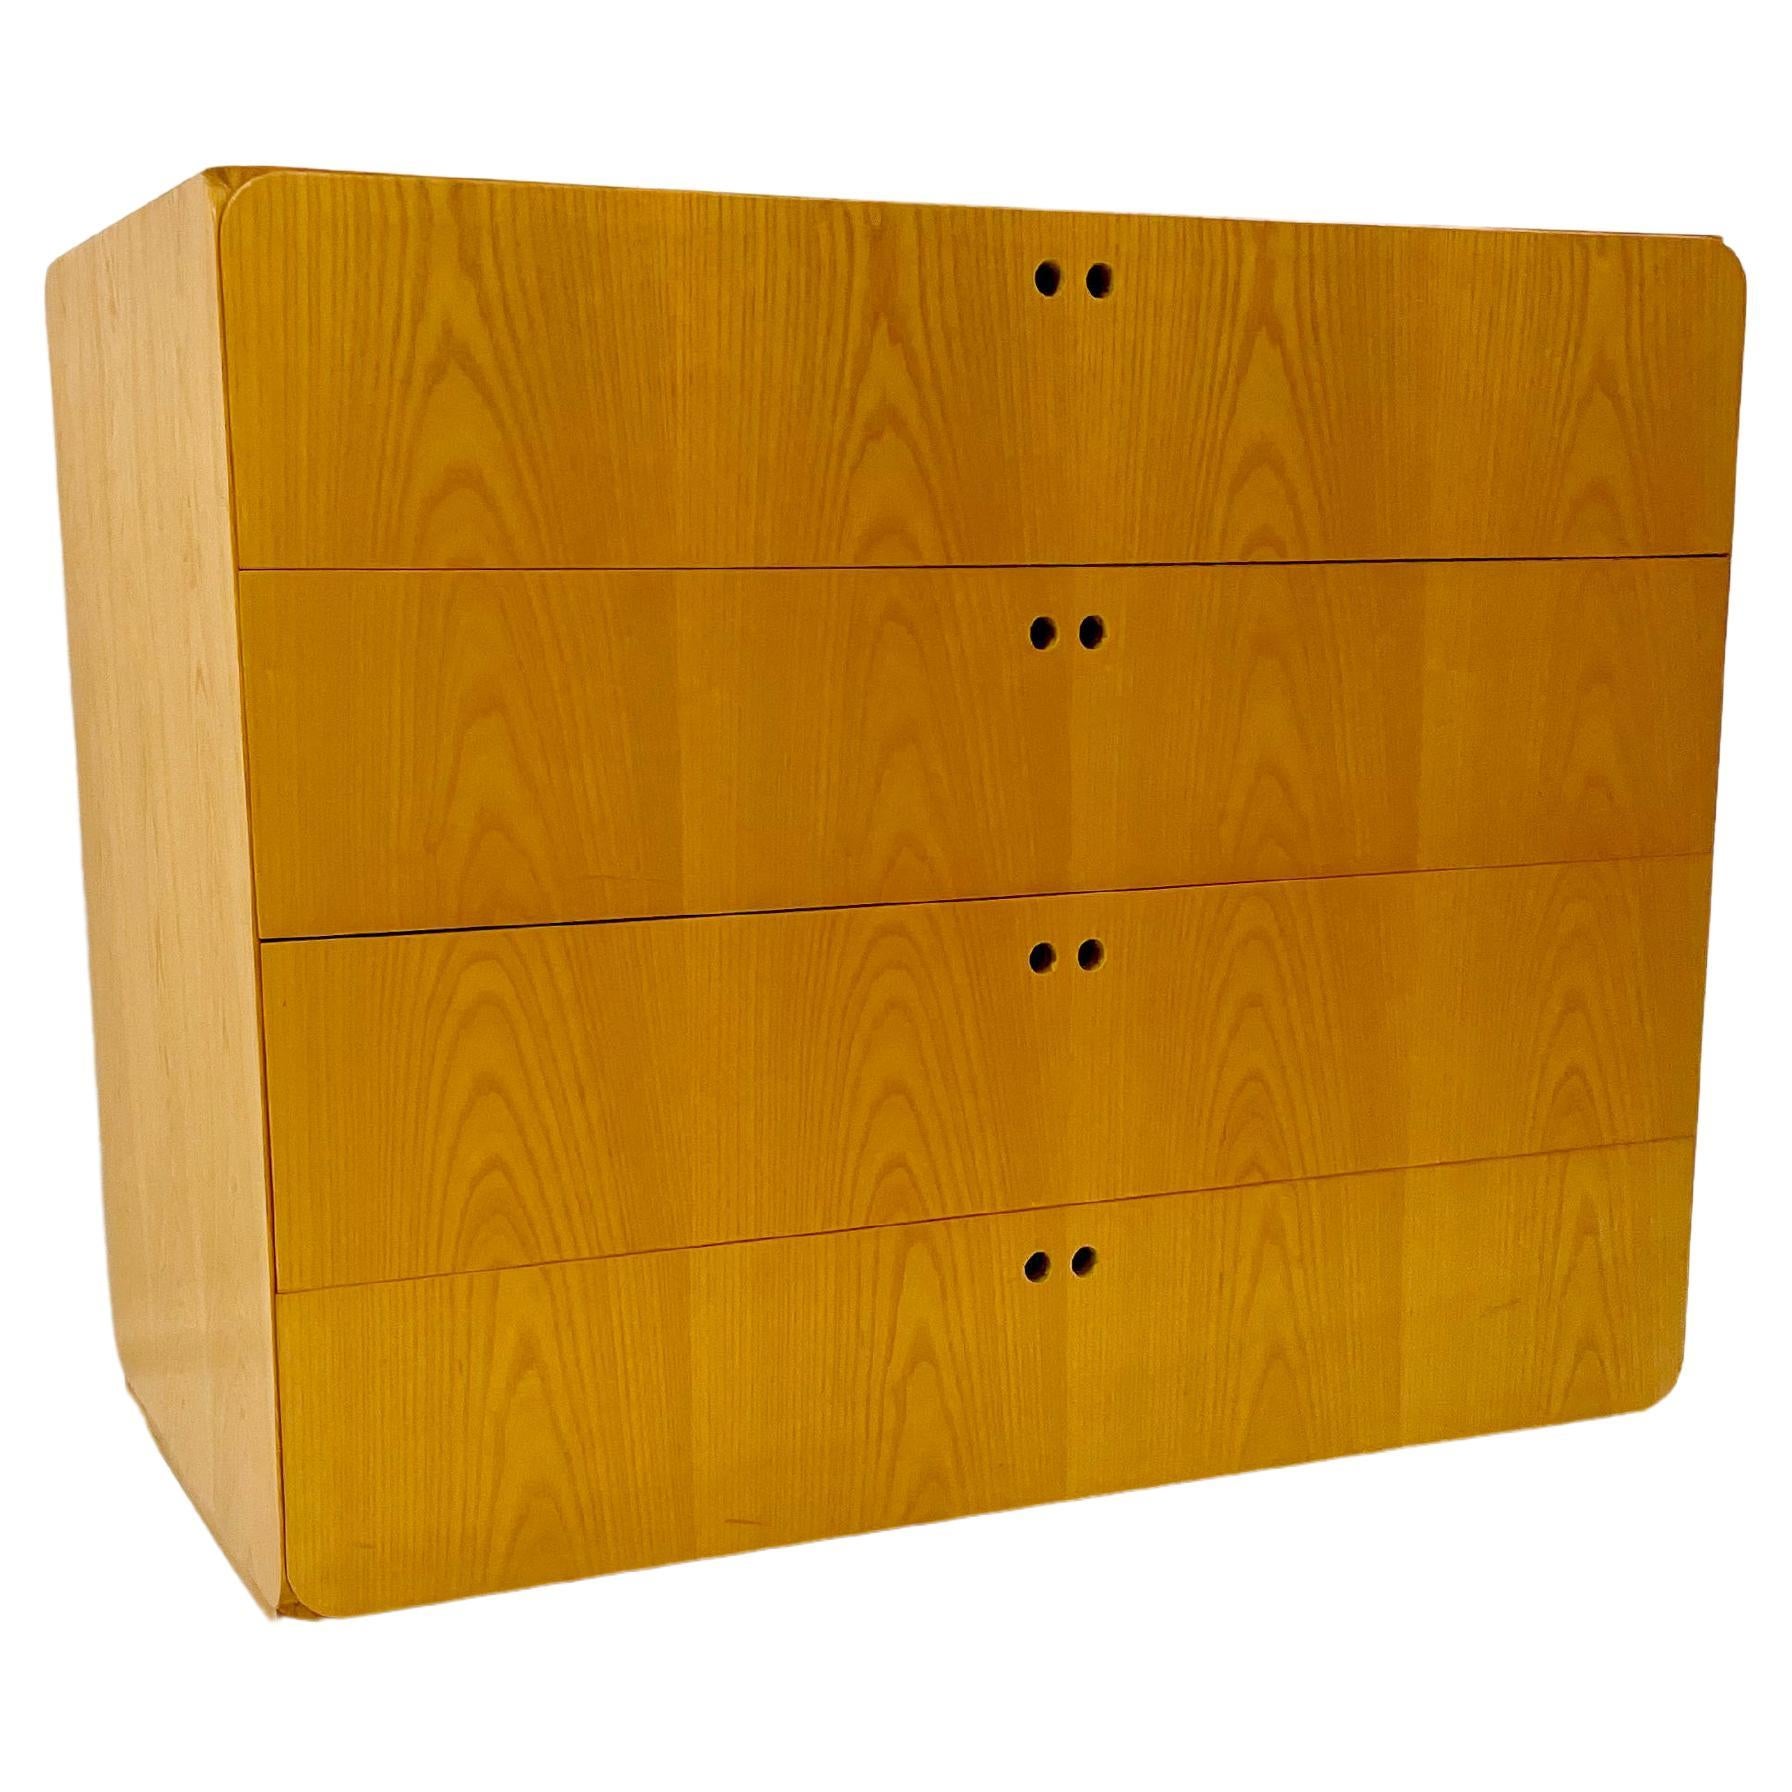 Chest of Drawers by Derk Jan de Vries, Wood, 1980s For Sale